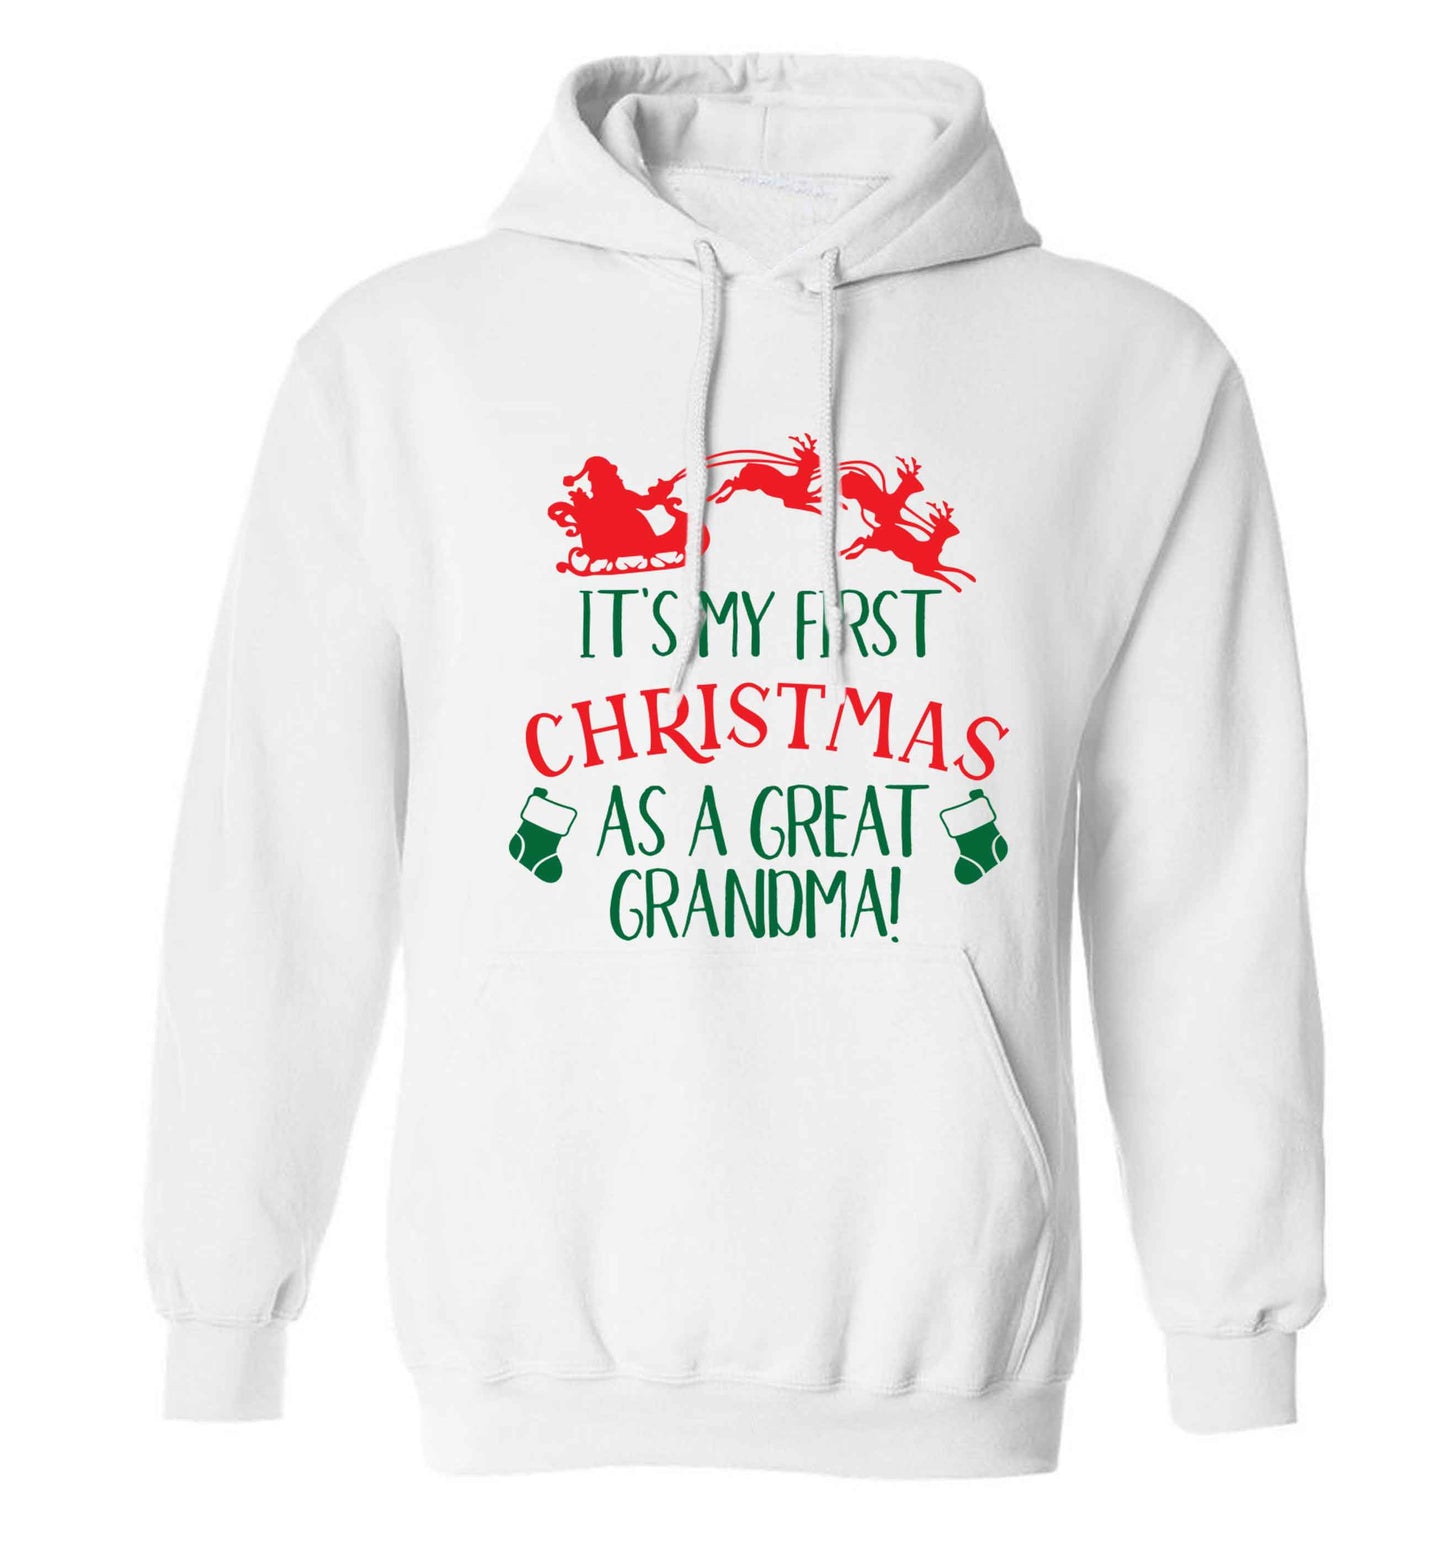 It's my first Christmas as a great grandma! adults unisex white hoodie 2XL